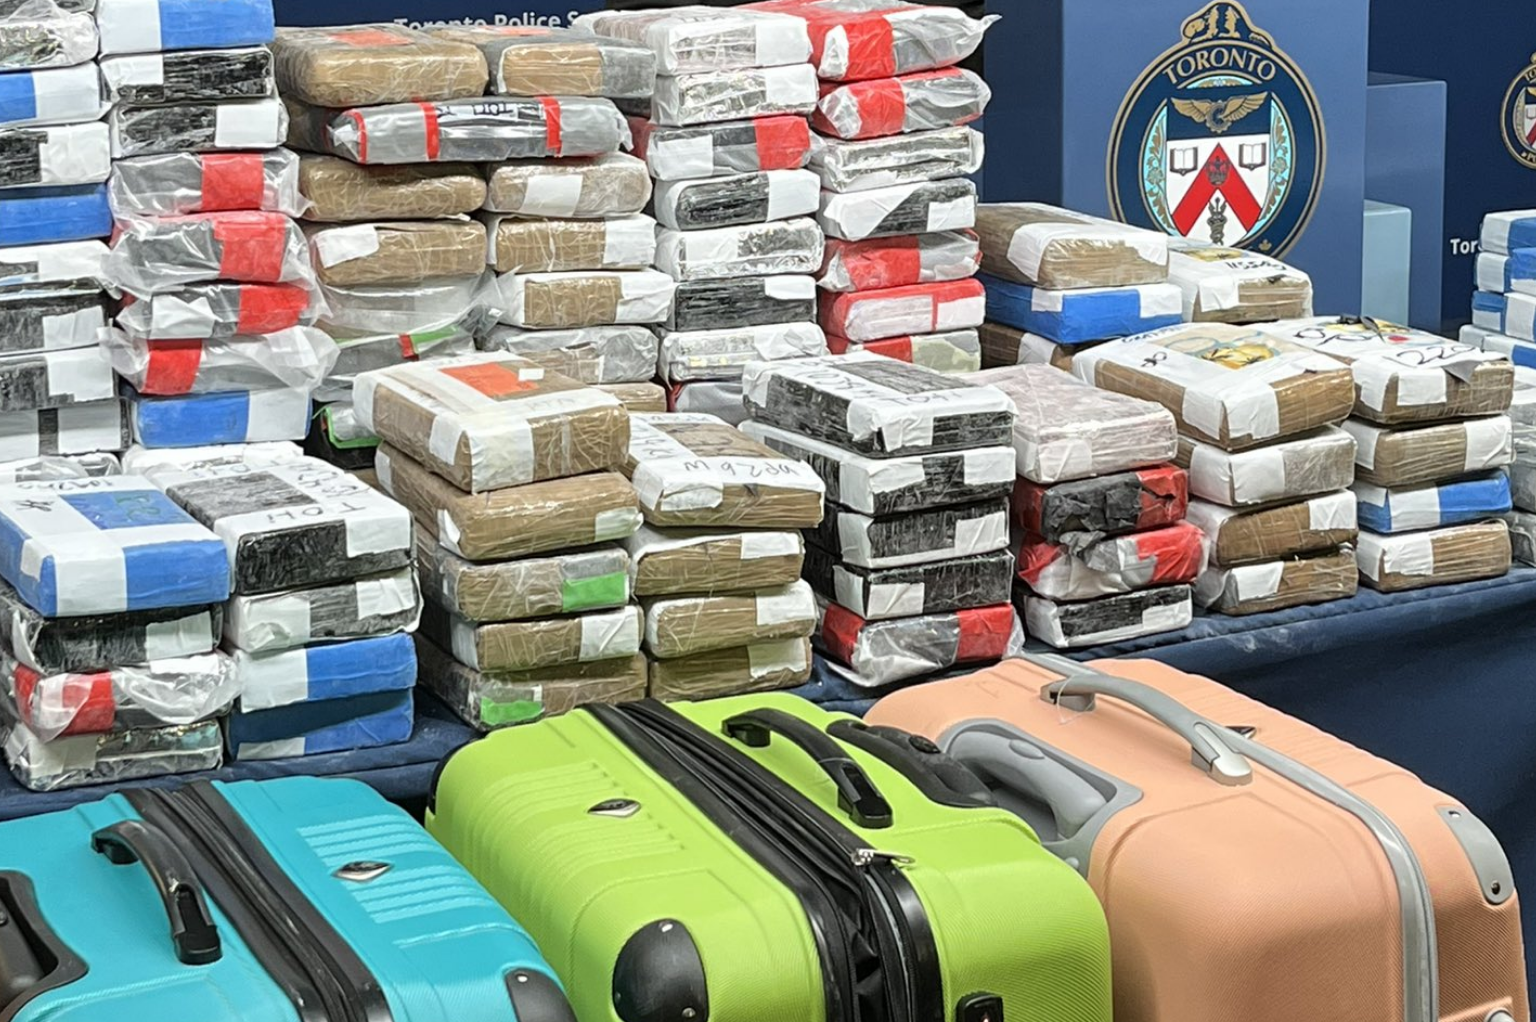 Toronto police seize largest amount of illegal drugs in one day in service’s history